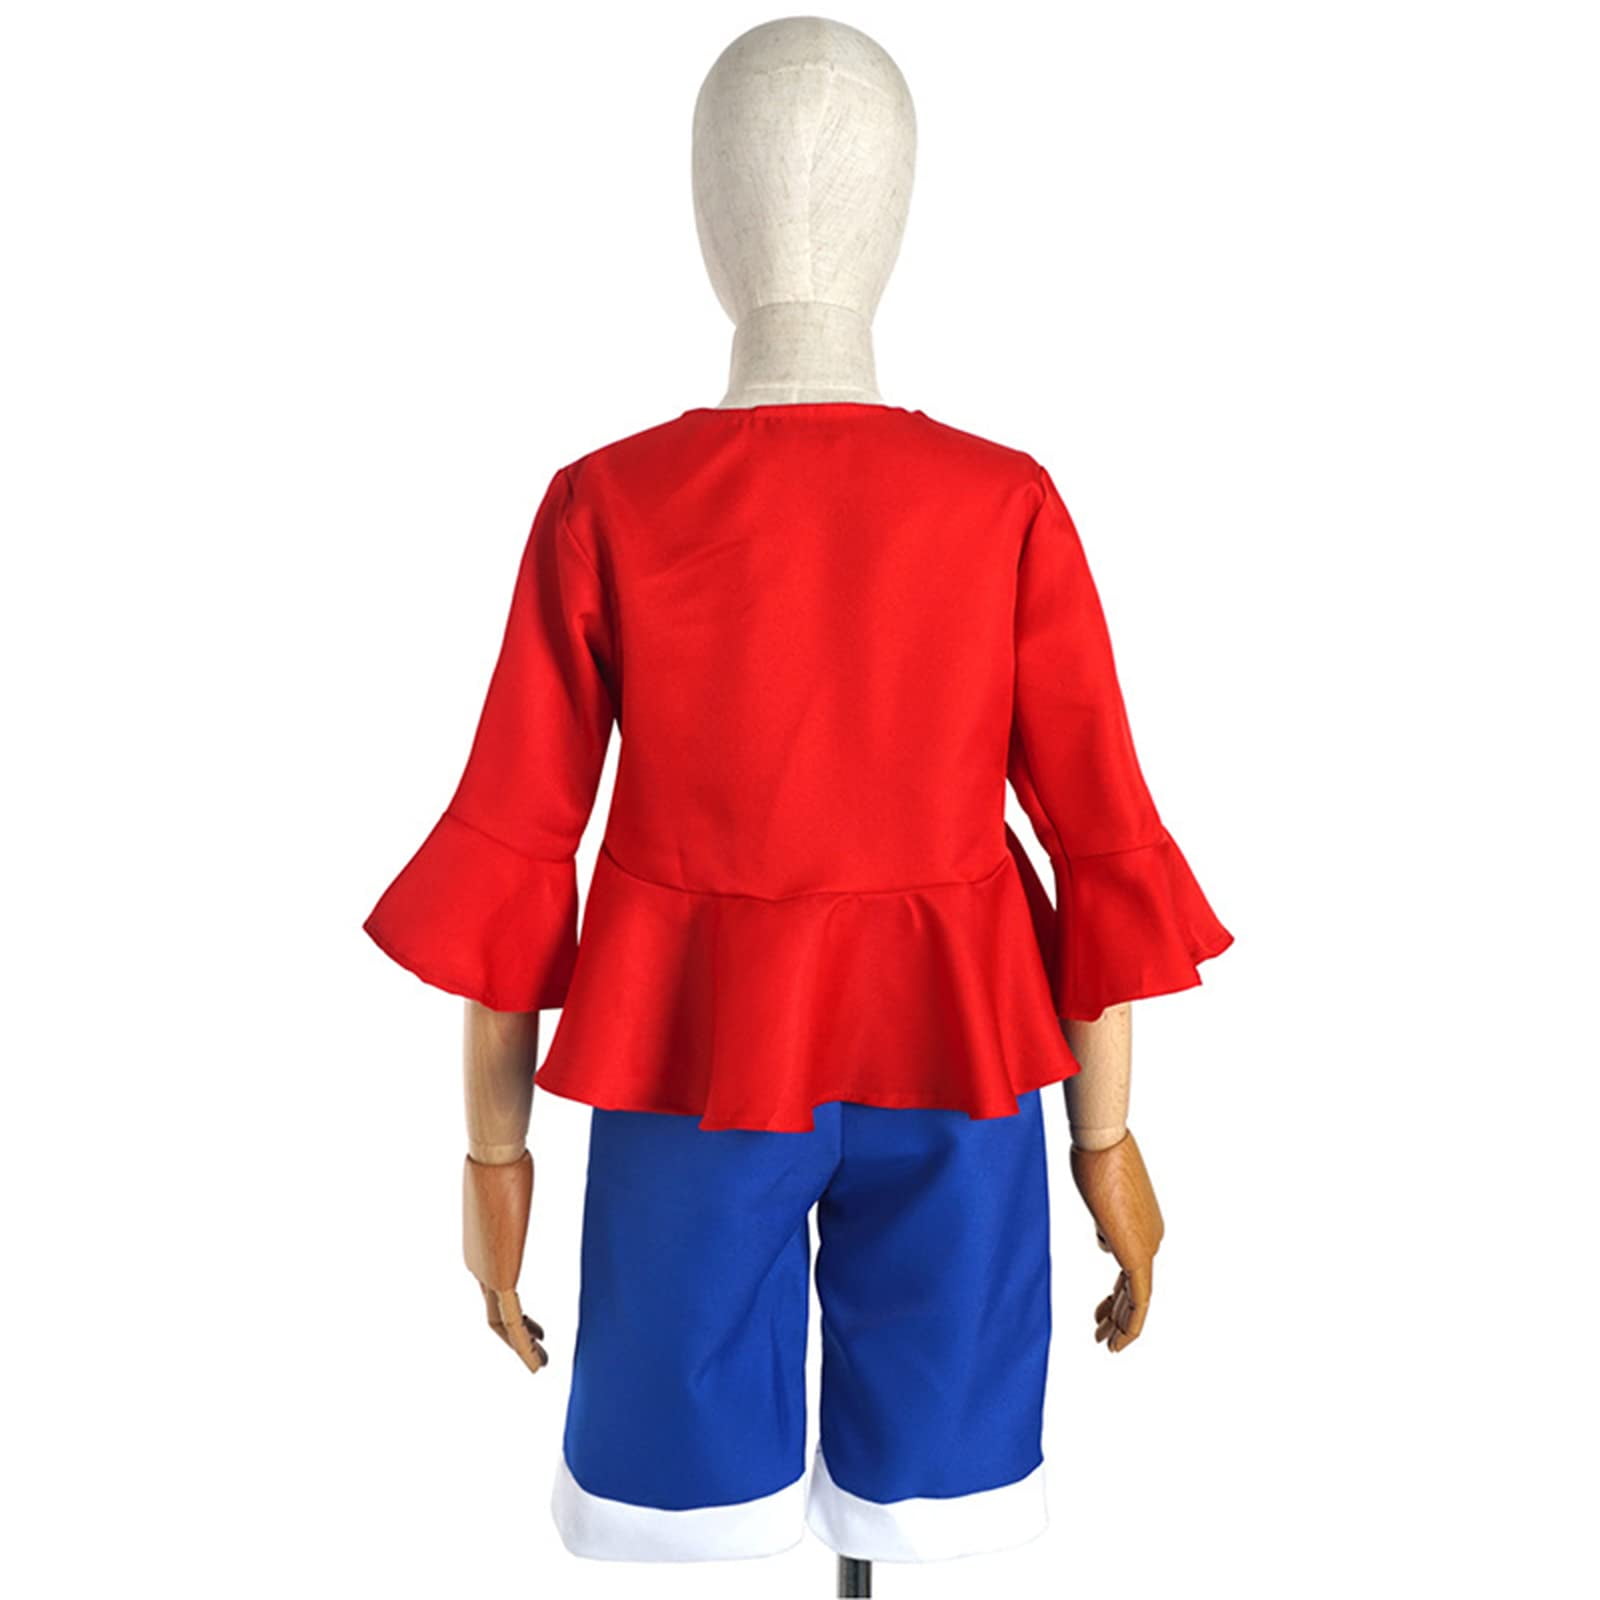 ONE PIECE Monkey D Luffy Costume Kids Luffy Red Shirt Cosplay Outfits Dress  Up for Halloween Cosplay - Walmart.com